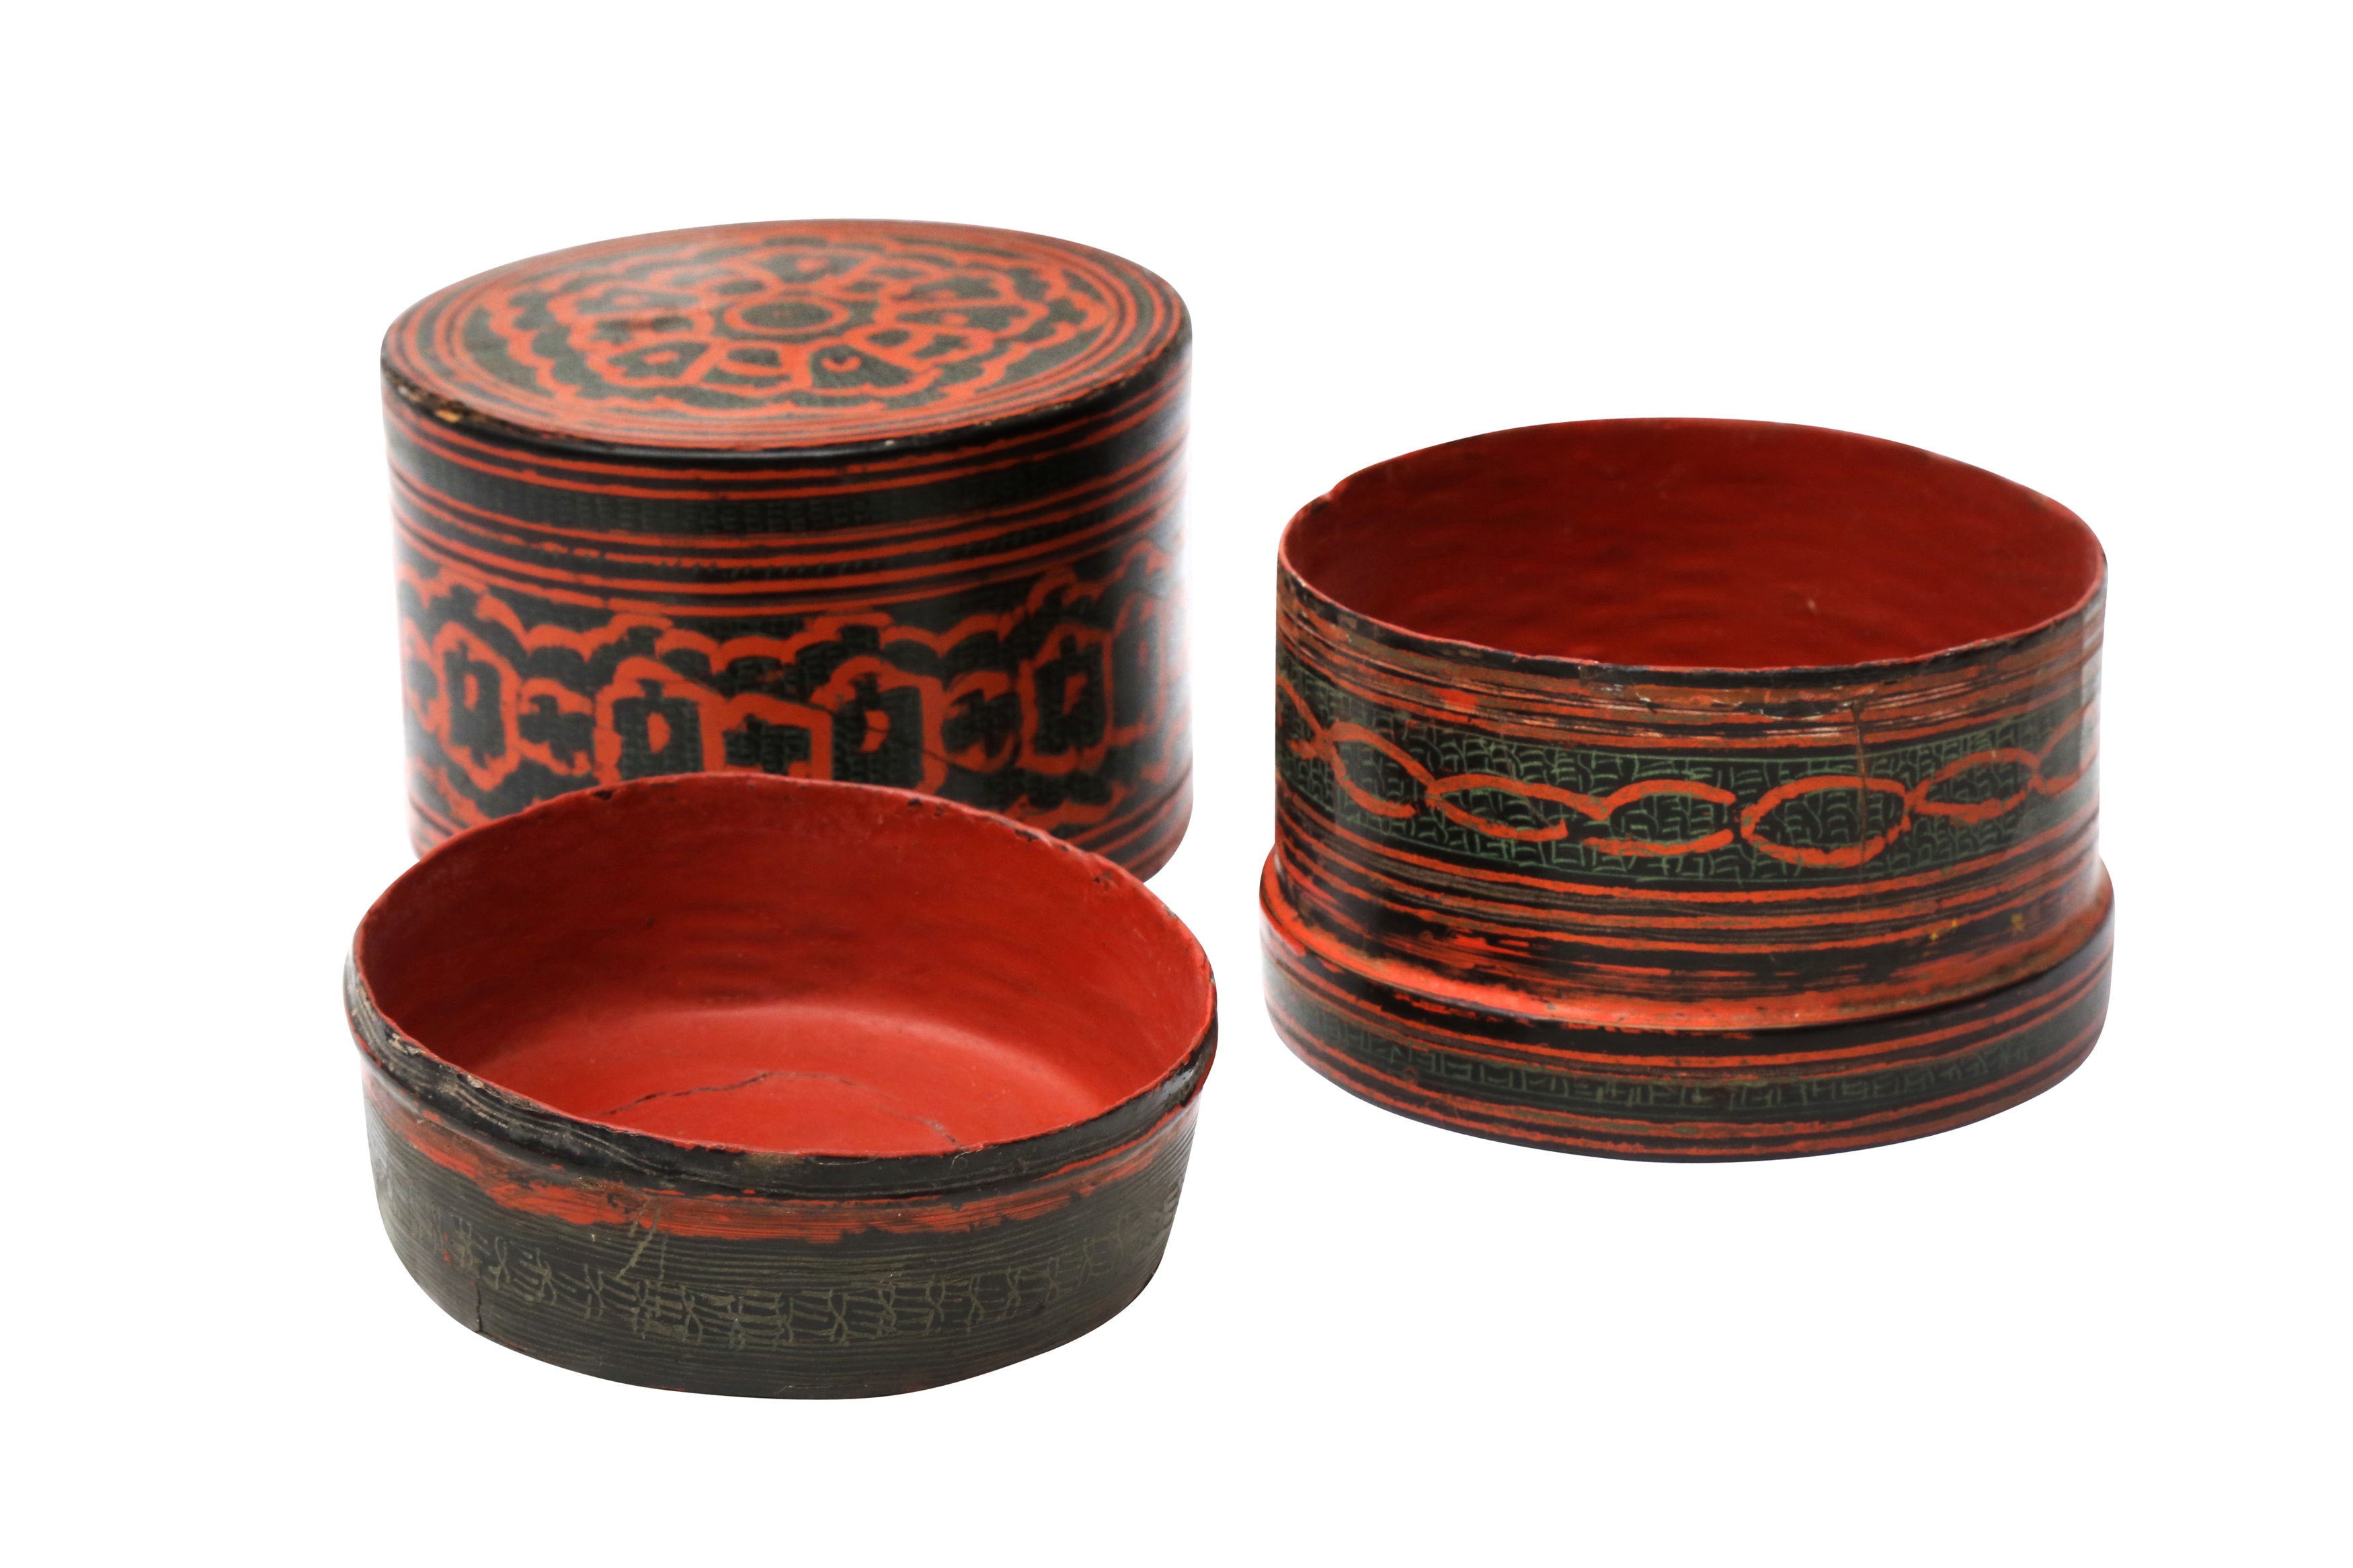 A SMALL BURMESE RED AND BLACK LACQUER BETEL-BOX AND COVER OFFERED ON BEHALF OF PROSPECT BURMA TO - Image 2 of 22